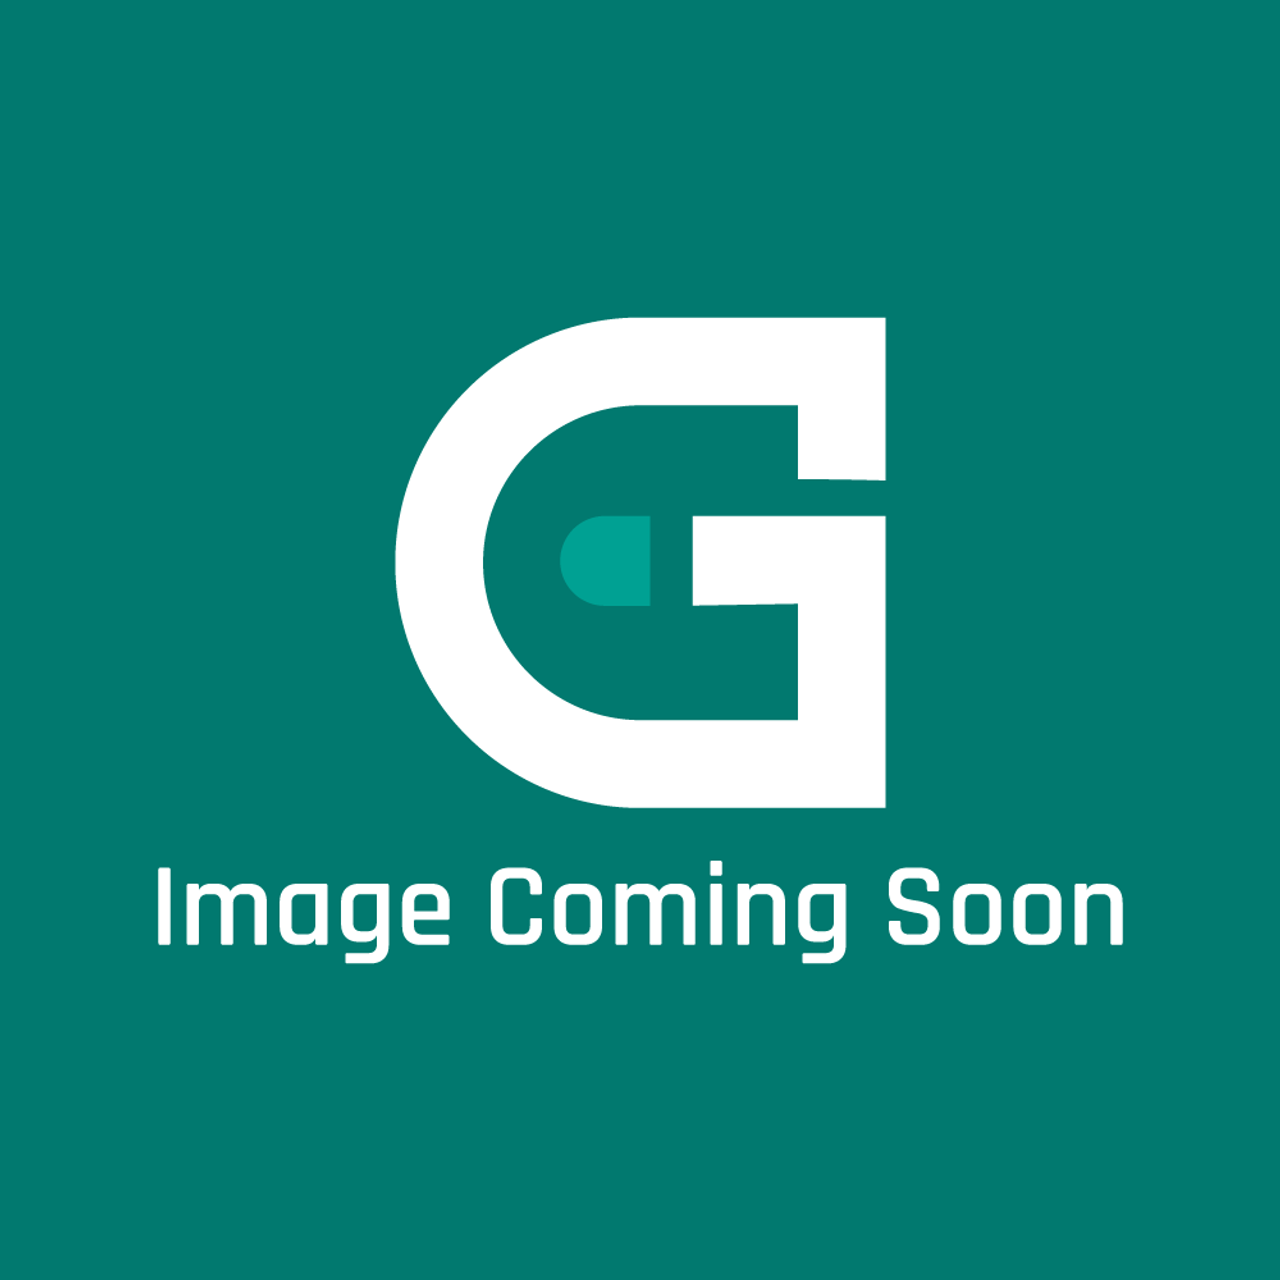 GE Appliances WR02X10678 - Grommet - Image Coming Soon!